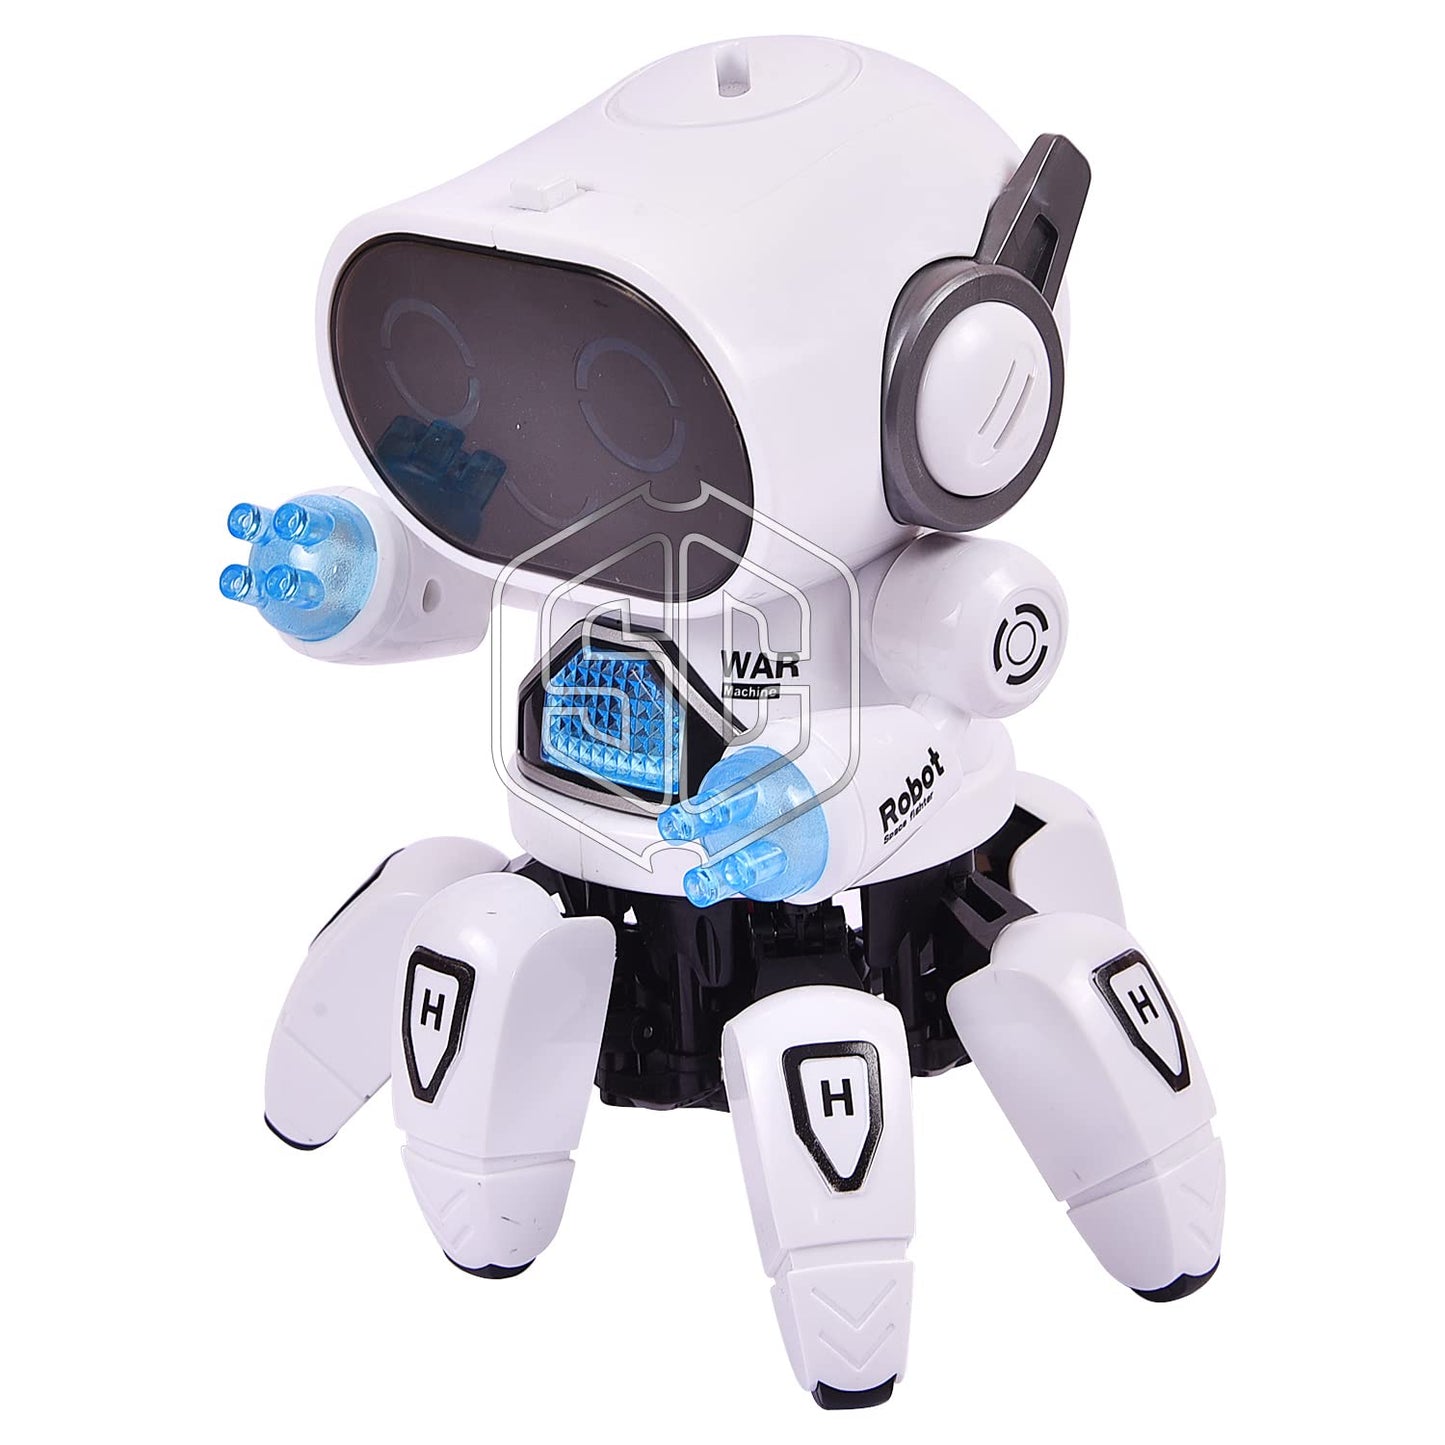 Pioneer Robot, Colorful Robot With Lights And Music, All Direction Movement, Dancing Robot Toys For Boys And Girls